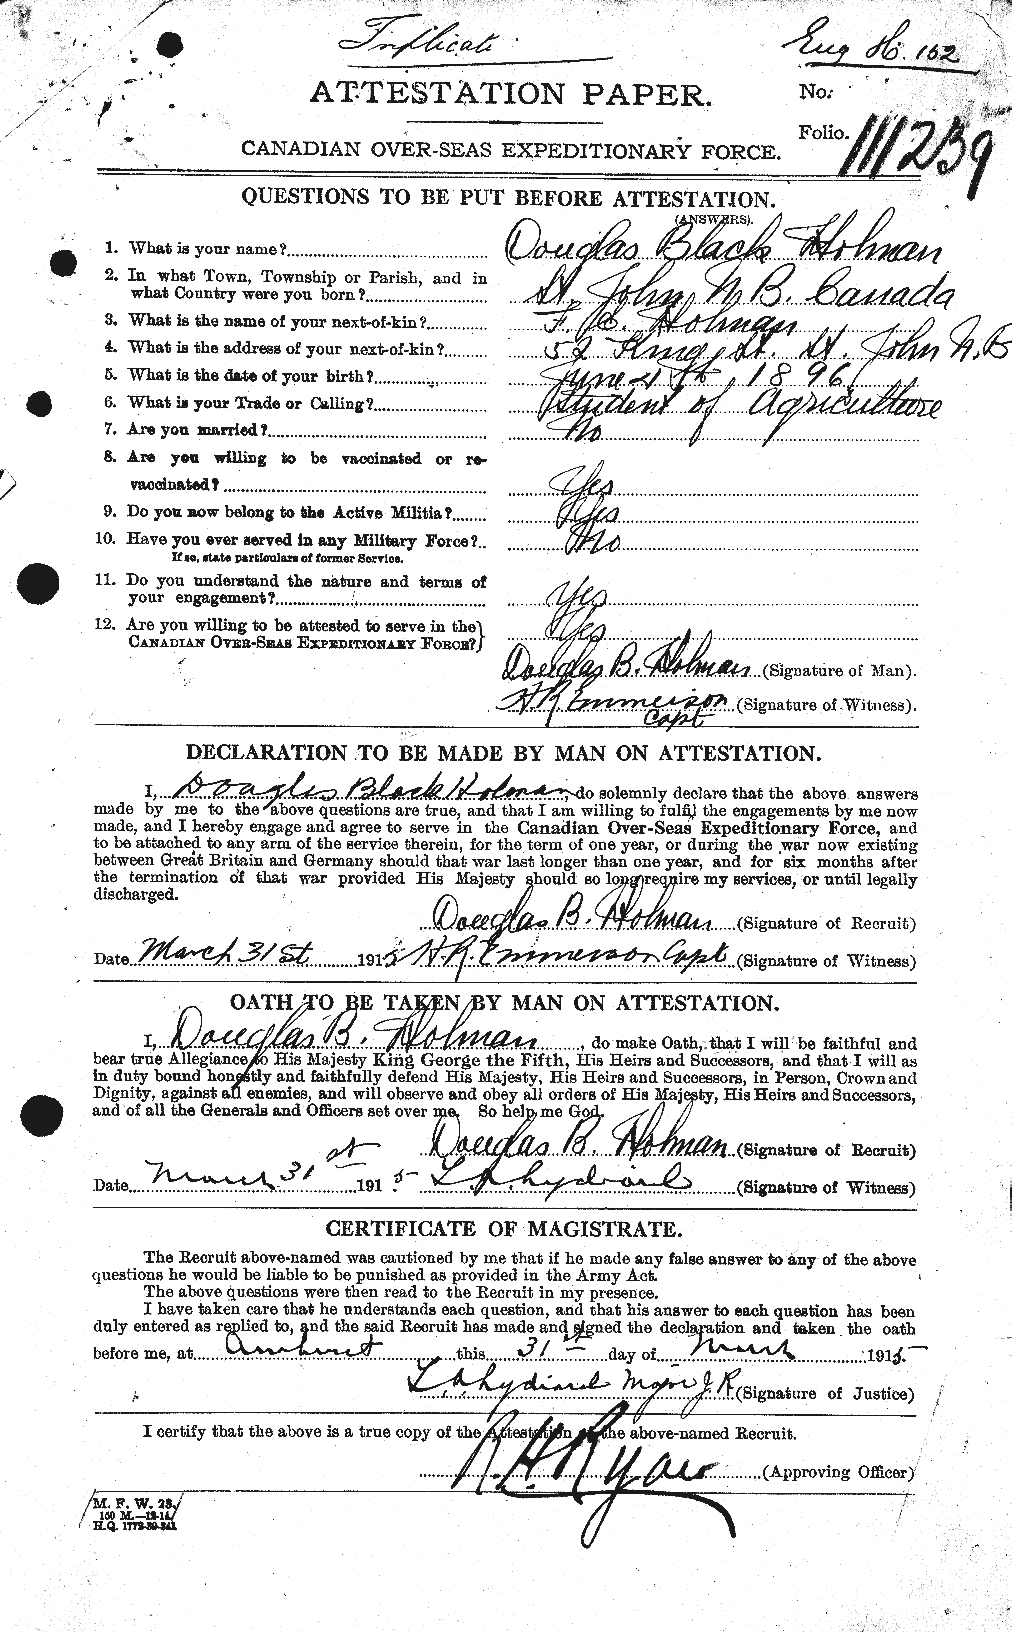 Personnel Records of the First World War - CEF 400212a